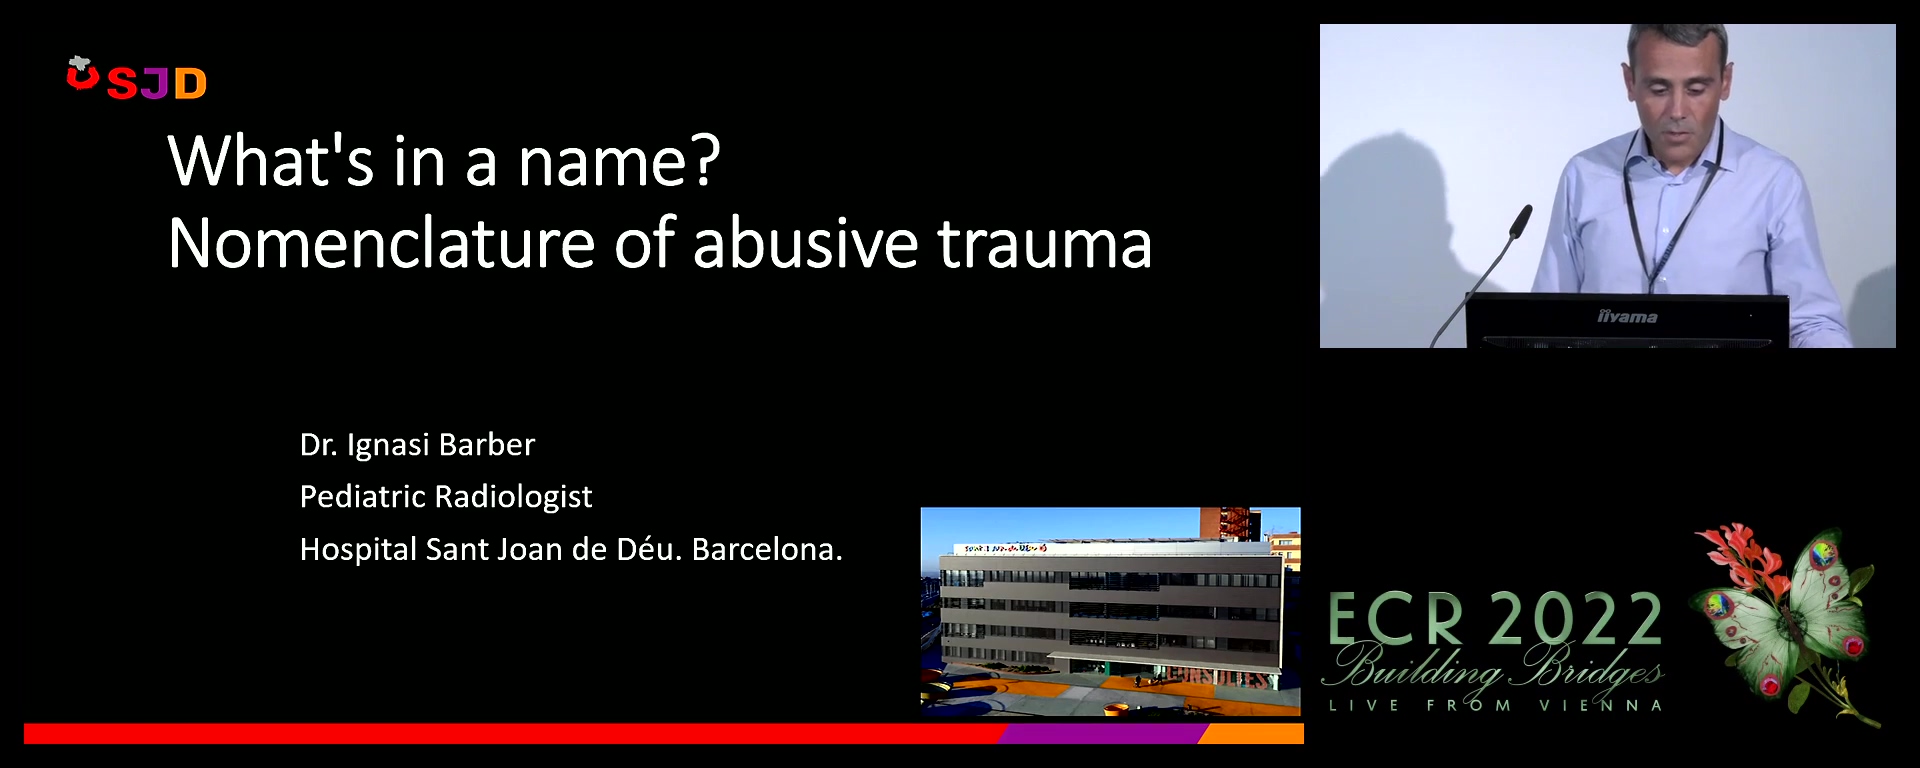 What's in a name? Nomenclature of abusive trauma